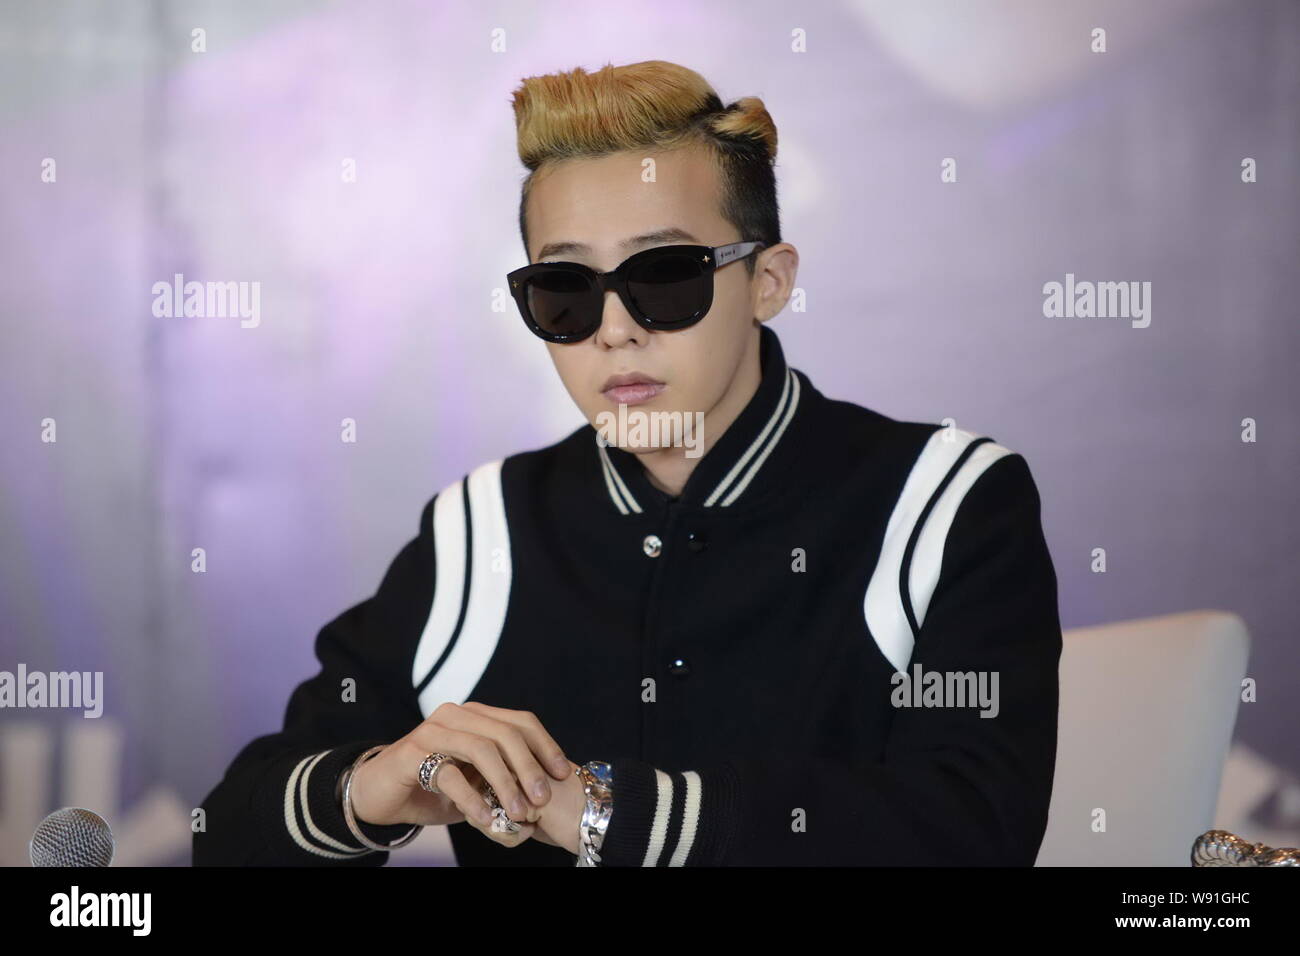 Korean Singer G Dragon Better Known As Gd Of The Korean Pop Group Bigbang Reacts During A Press Conference For His Solo Concert One Of A Kind In Be Stock Photo Alamy